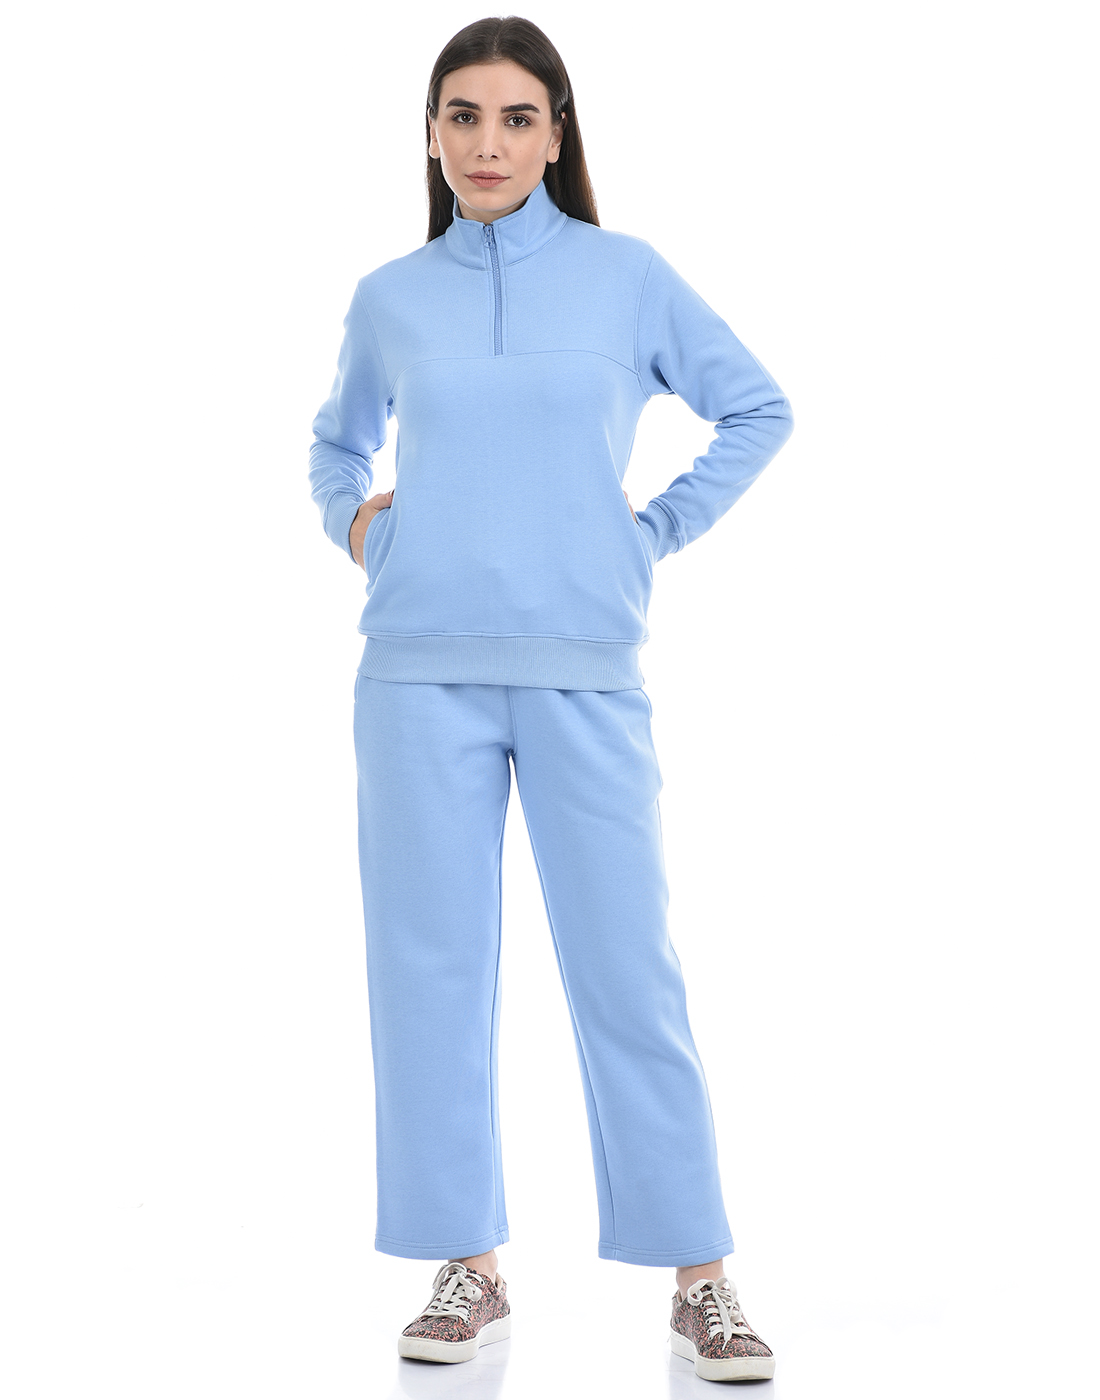 ONEWAY Women Solid Blue Track Suit